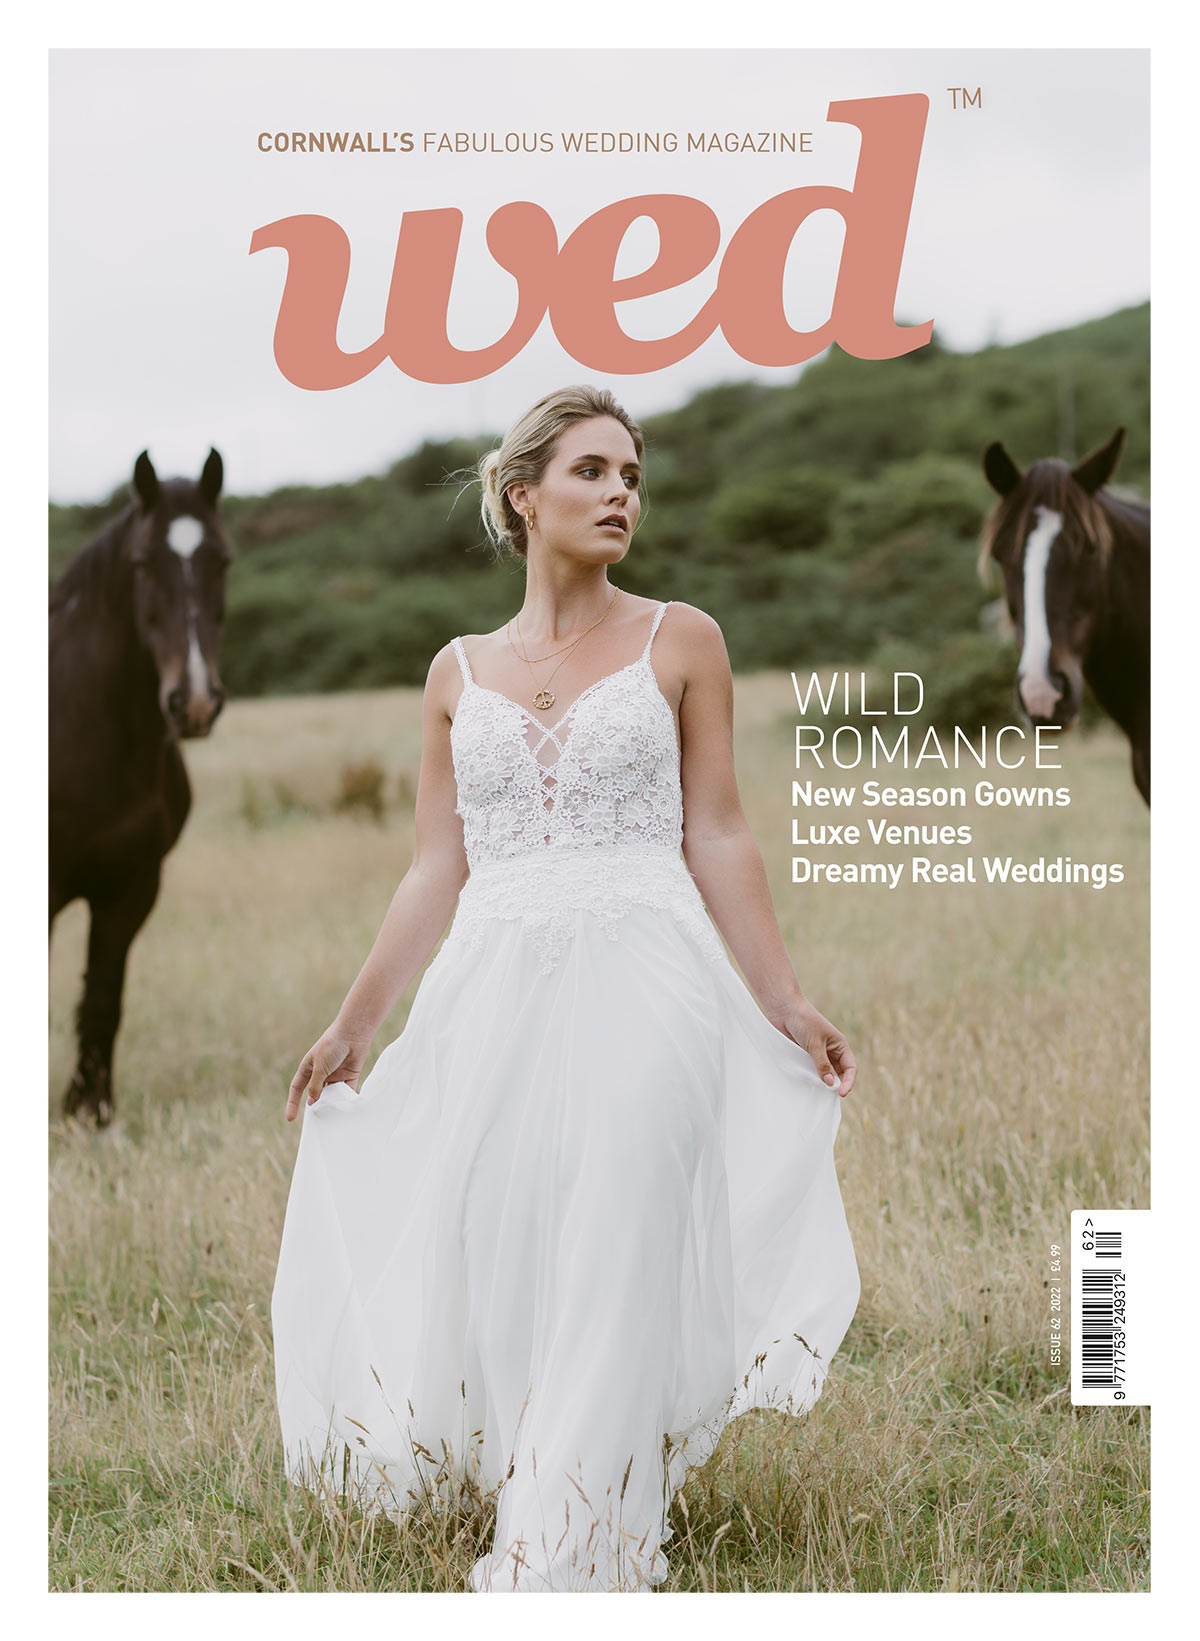 Free copy of Wed Magazine for newly engaged couples!